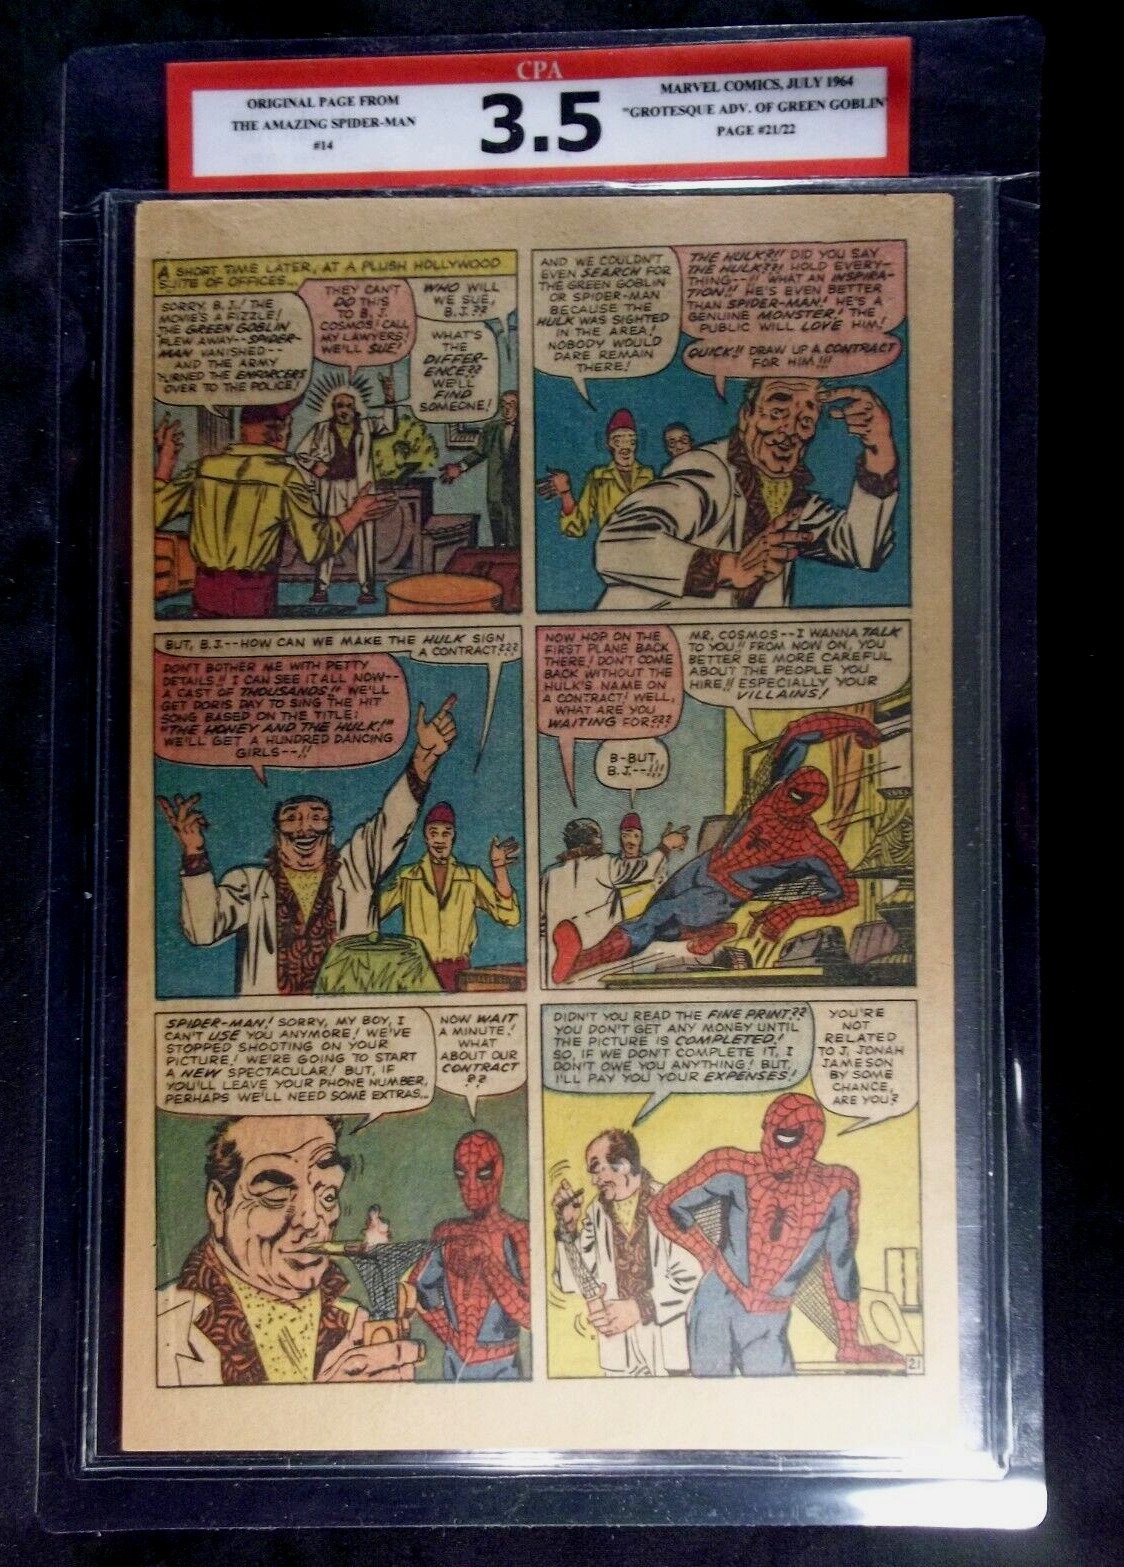 Amazing Spider-man #14 CPA 3.5 SINGLE PAGE #21/22 1st app. The Green Goblin